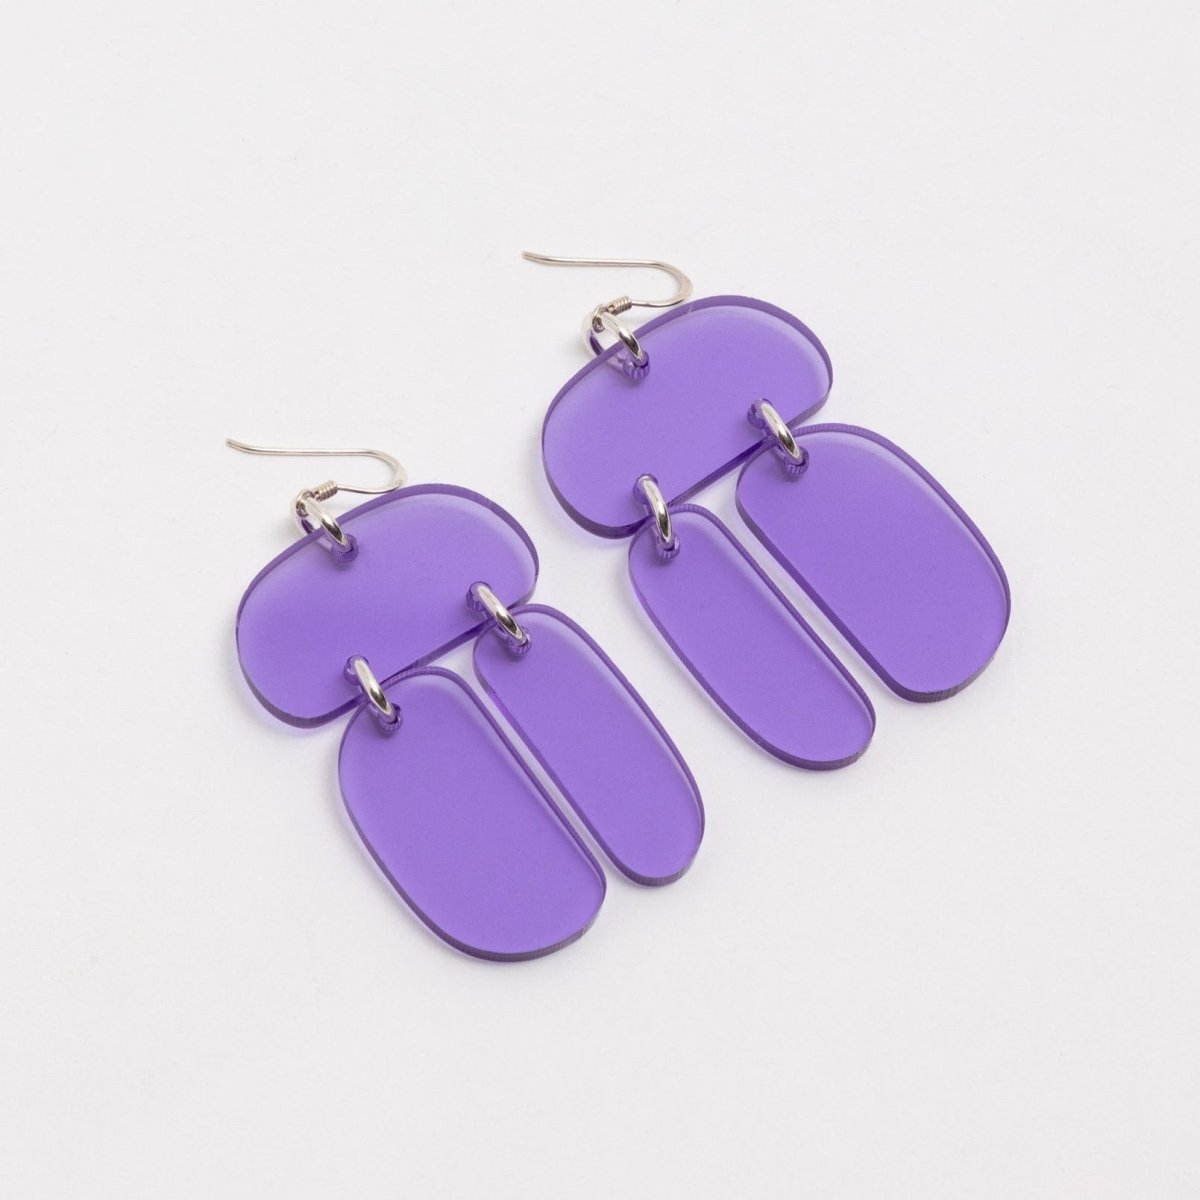 Three softly rounded translucent violet colored ovoids come together with sterling silver rings and sterling silver ear wires. The Ovoid Trio Earrings in Translucent Violet are designed and handcrafted by Warren Steven Scott in Canada.